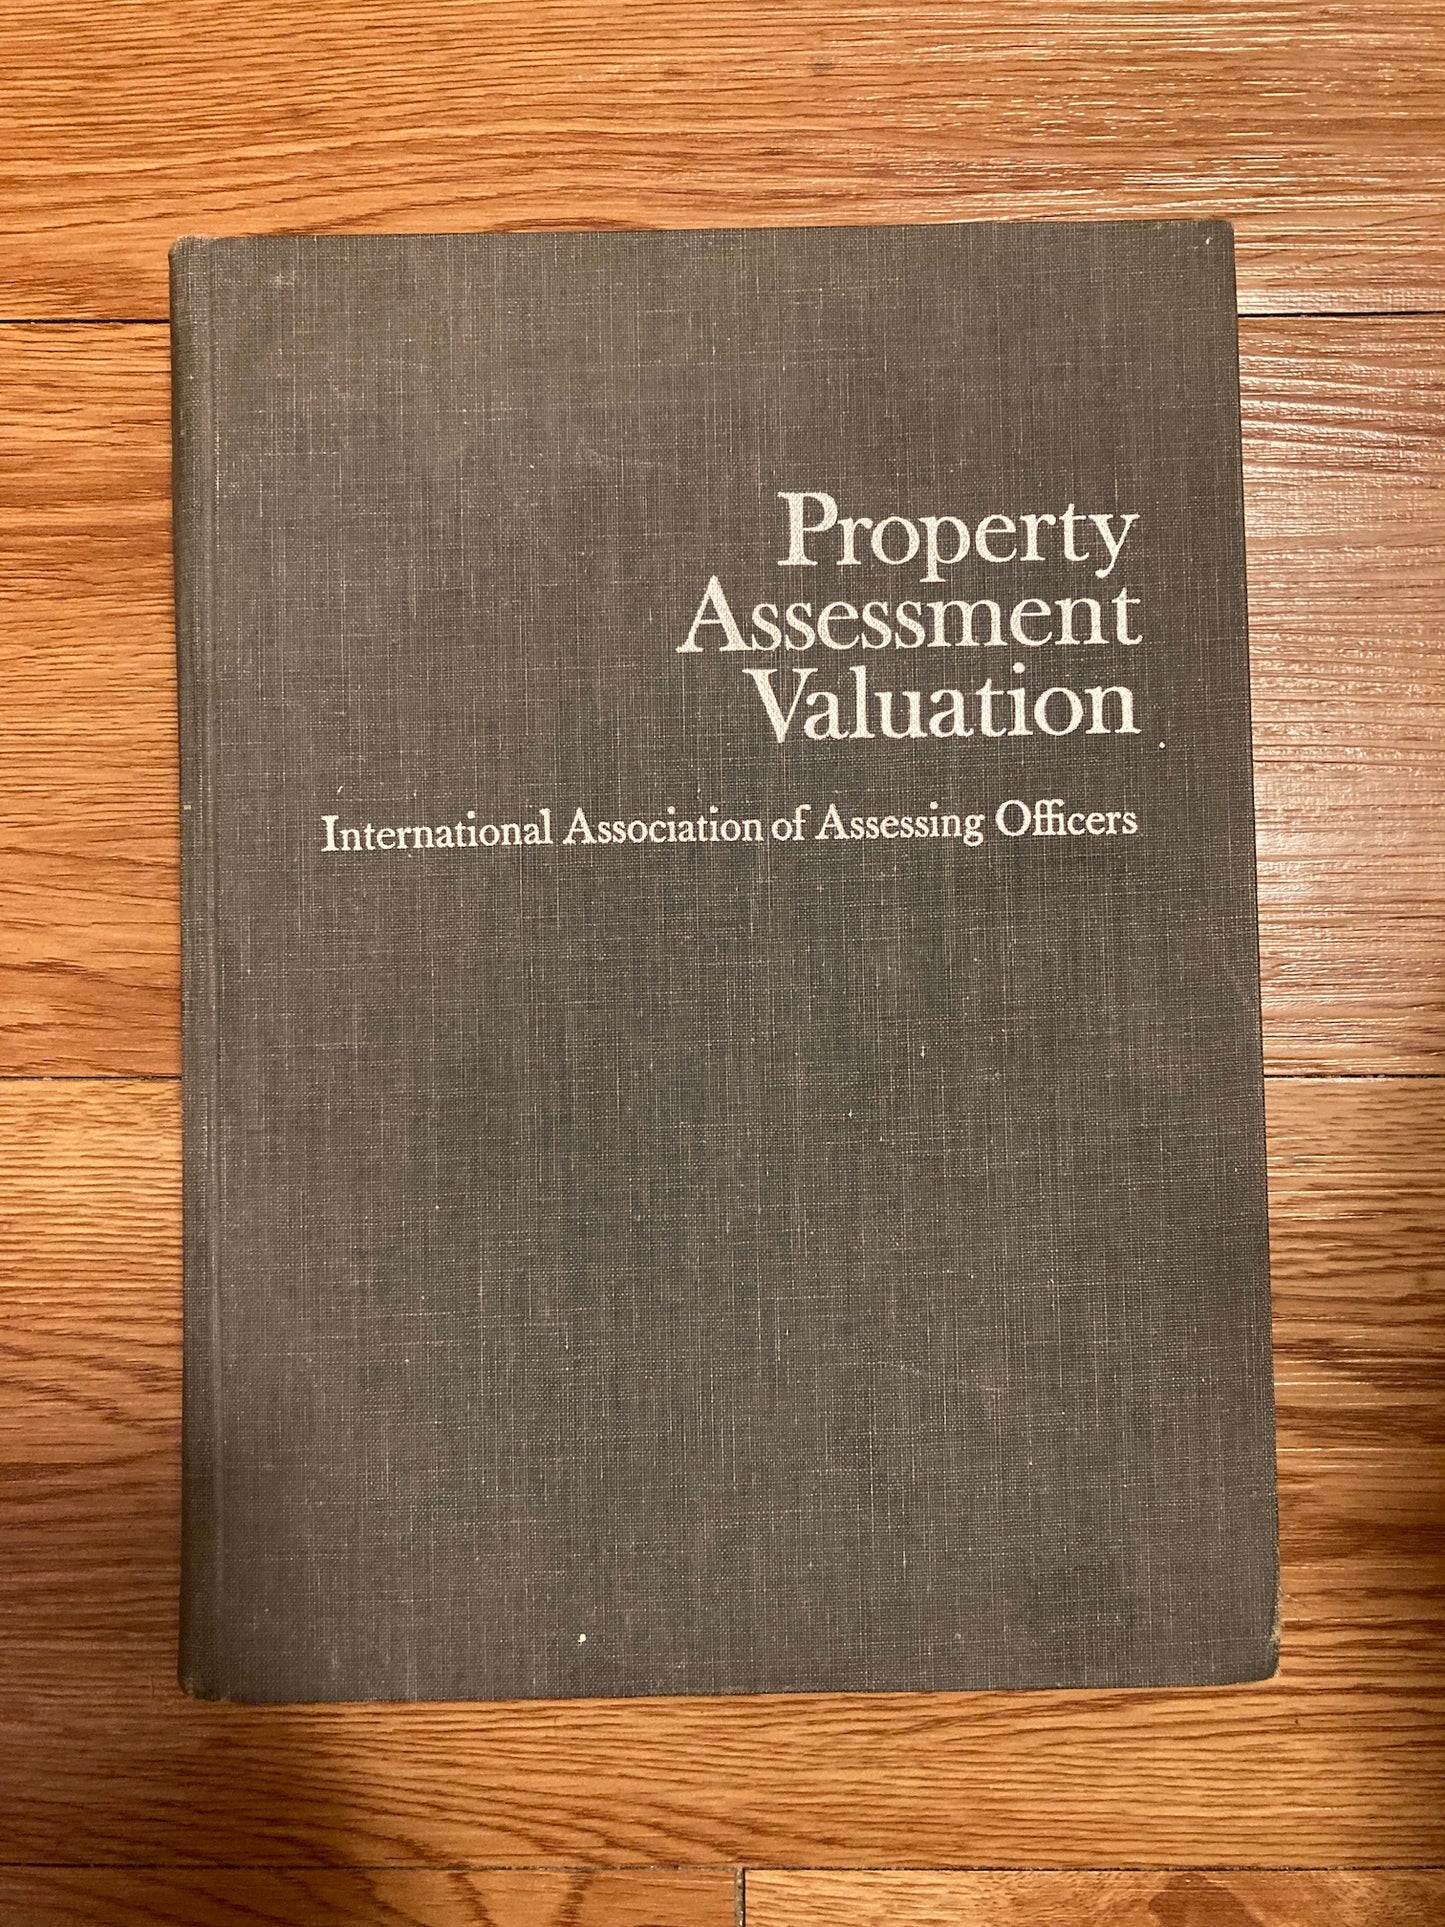 Property Assessment Valuation, Association of Assessing Officers